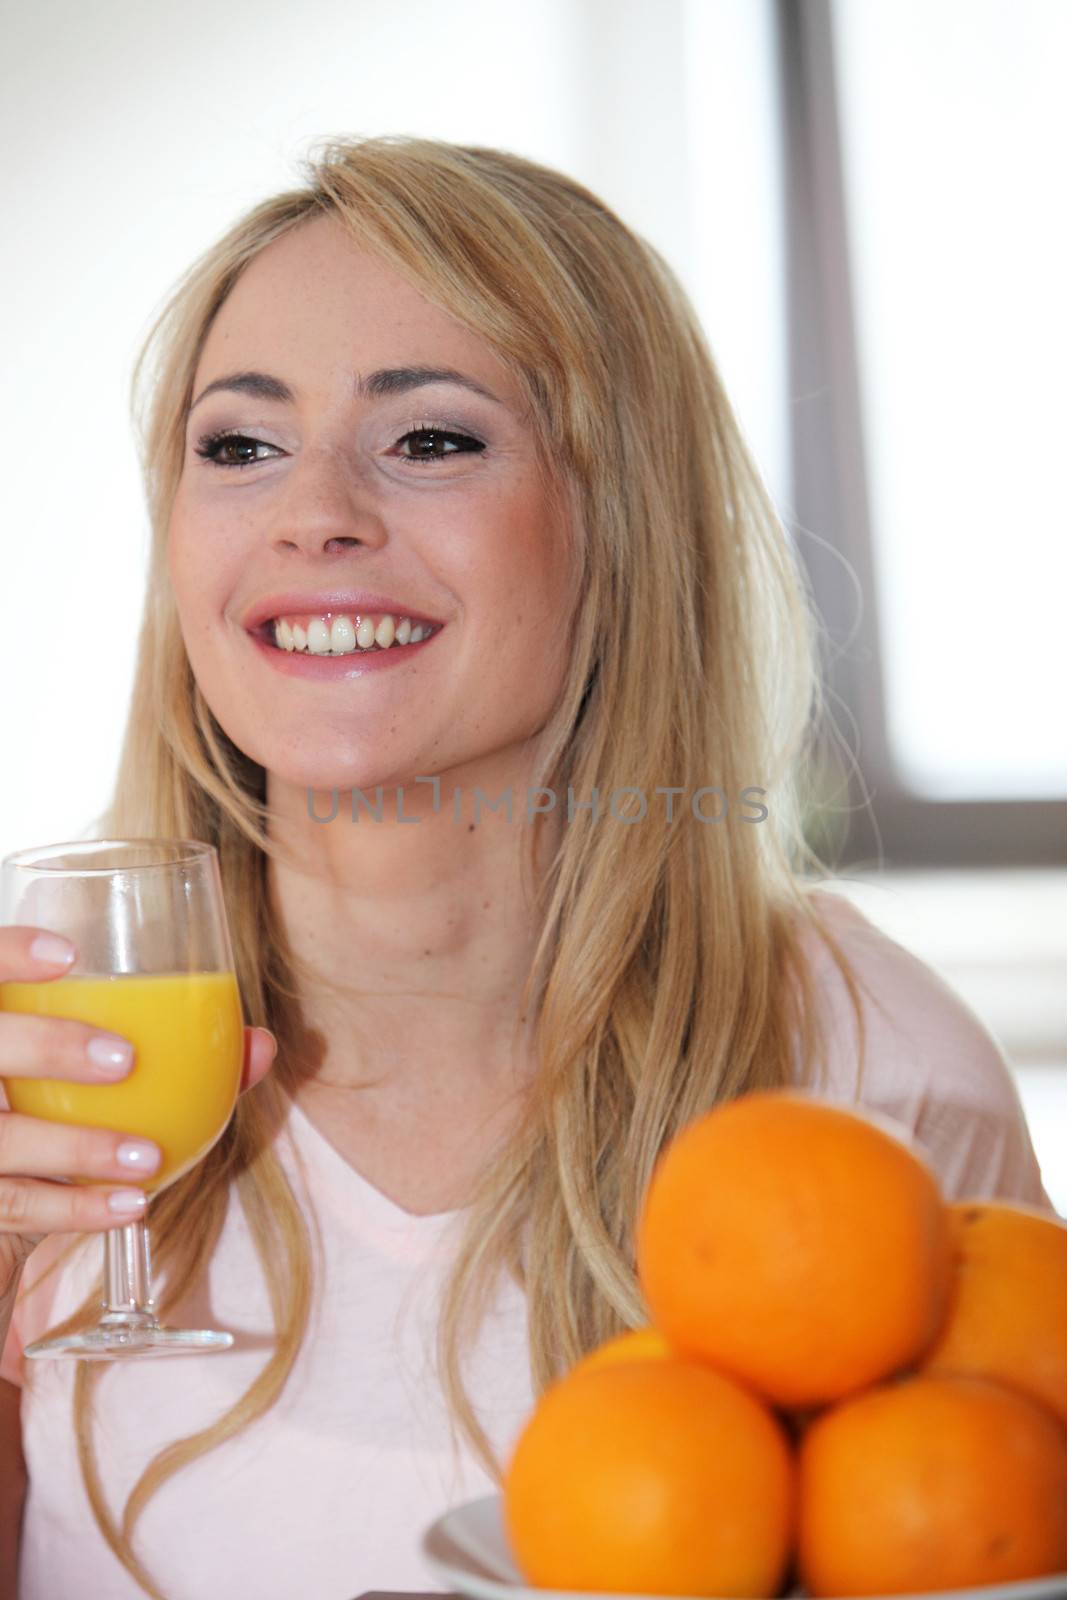 Smiling happy young woman enjoying a glass of fresh orange juice with whole oranges in a bowl in the foreground